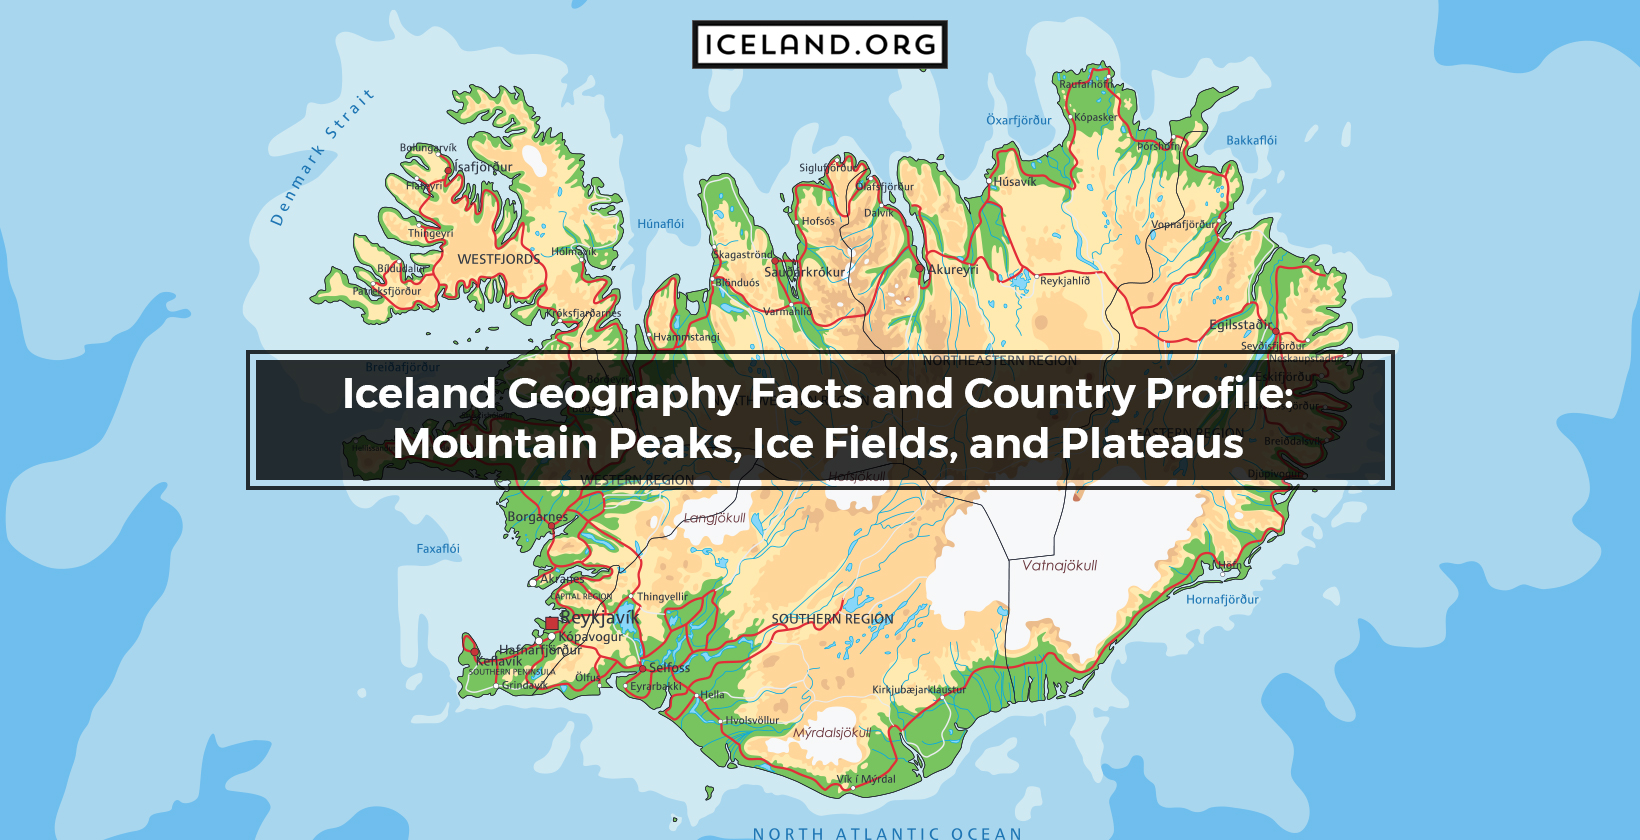 Iceland Geography Facts and Country Profile: Mountain Peaks, Ice